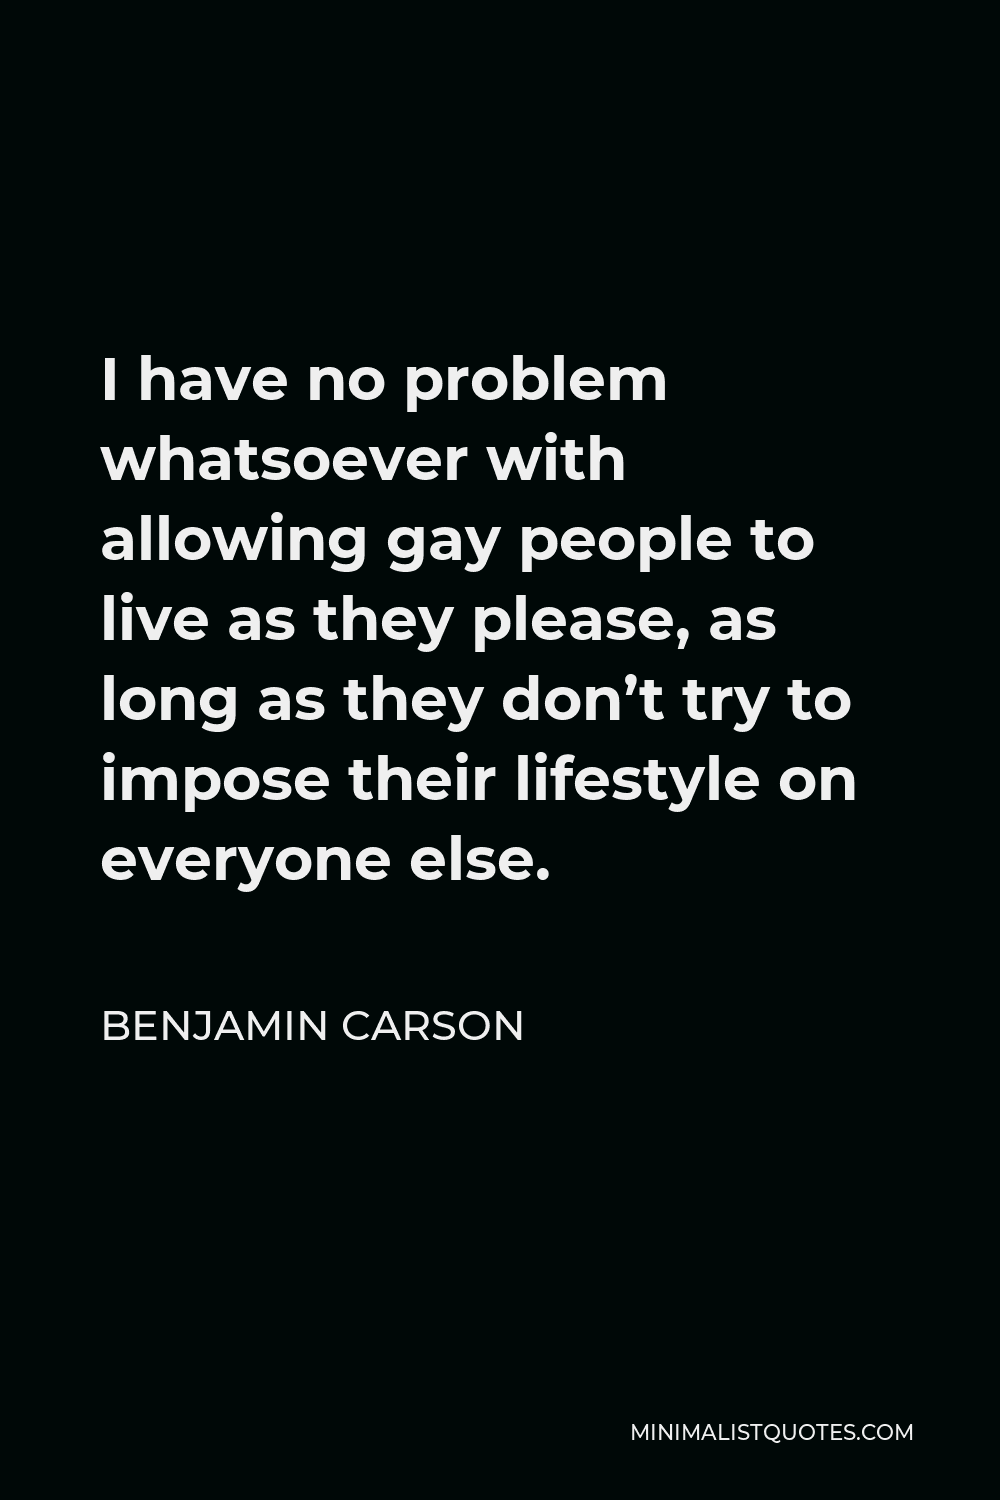 Benjamin Carson Quote - I have no problem whatsoever with allowing gay people to live as they please, as long as they don’t try to impose their lifestyle on everyone else.